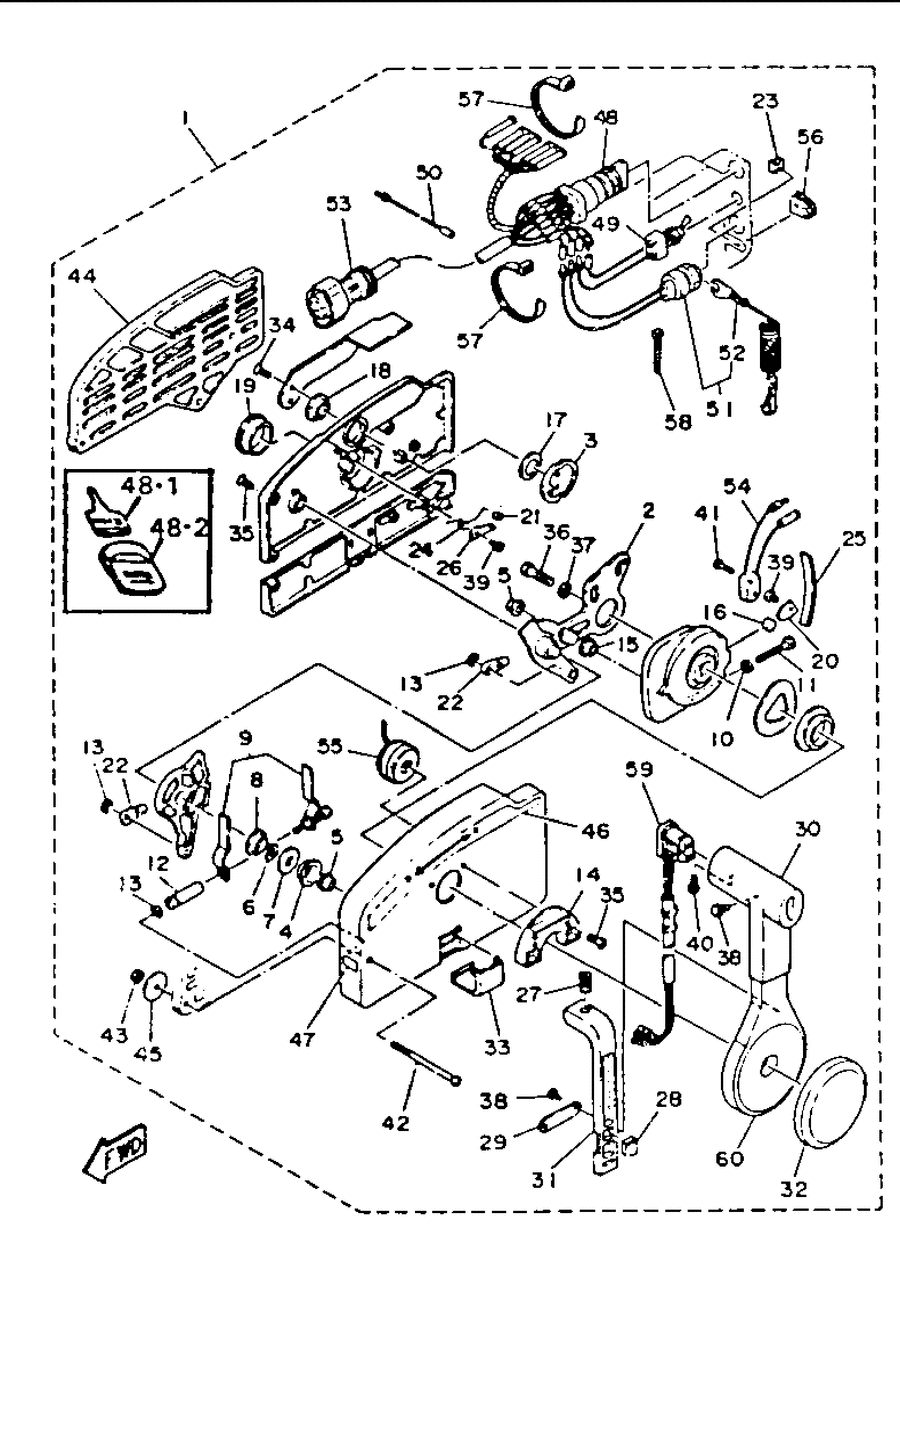 1990 40SD-JD REMOTE CONTROL COMPONENTS